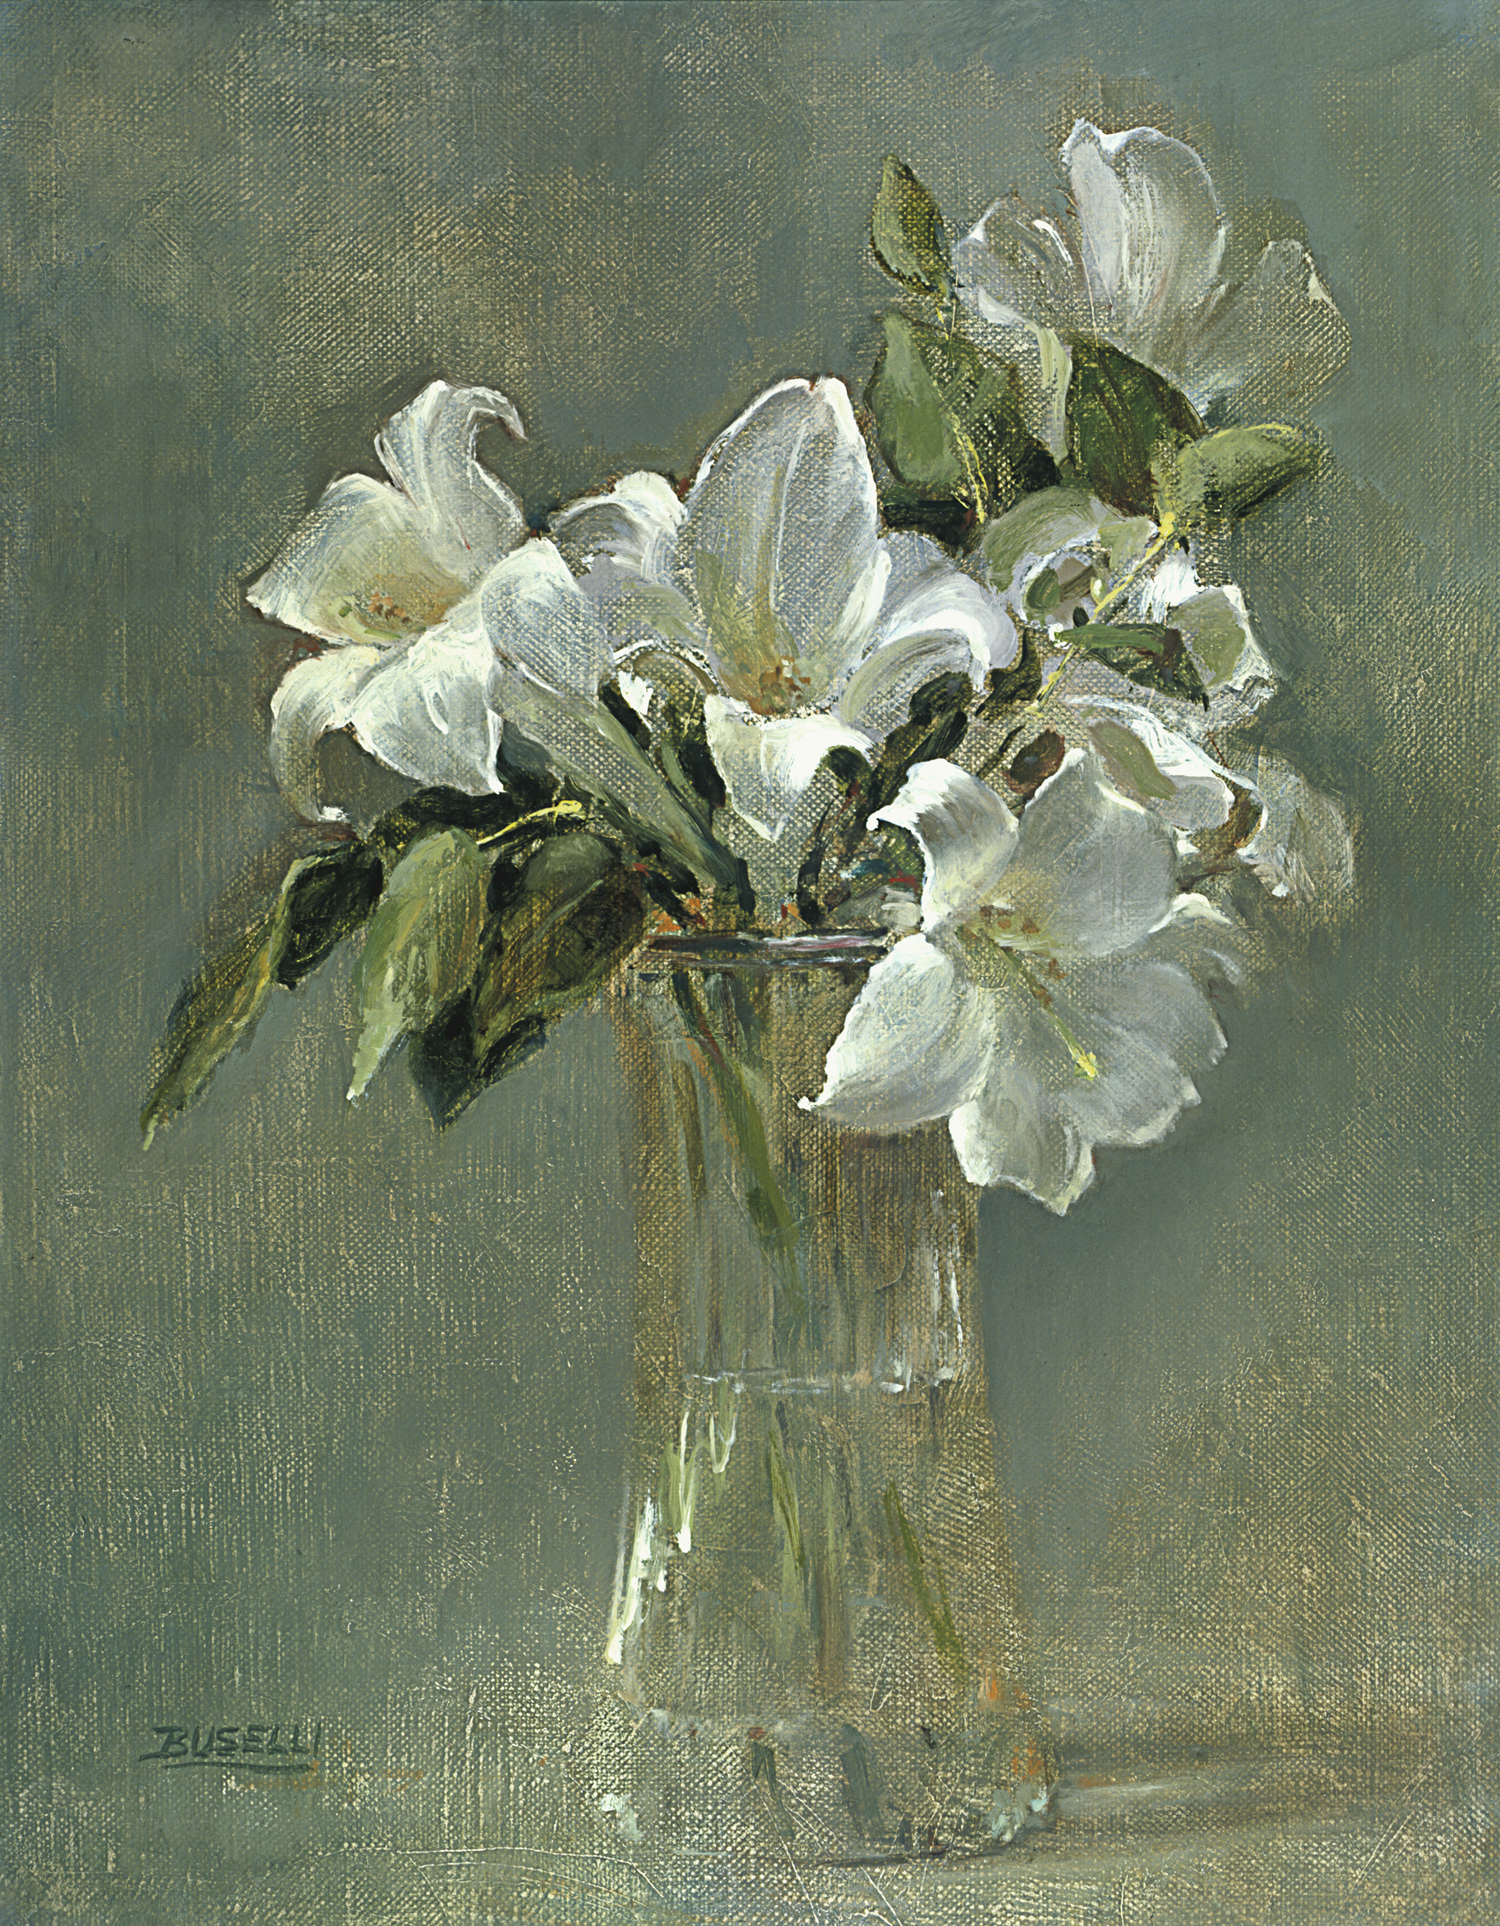   LILIES   OIL PAINTERS OF AMERICA NATIONAL EXHIBITION  | GALLERY AMERICANA | CARMEL, CA  oil on linen | 18" x 15" 